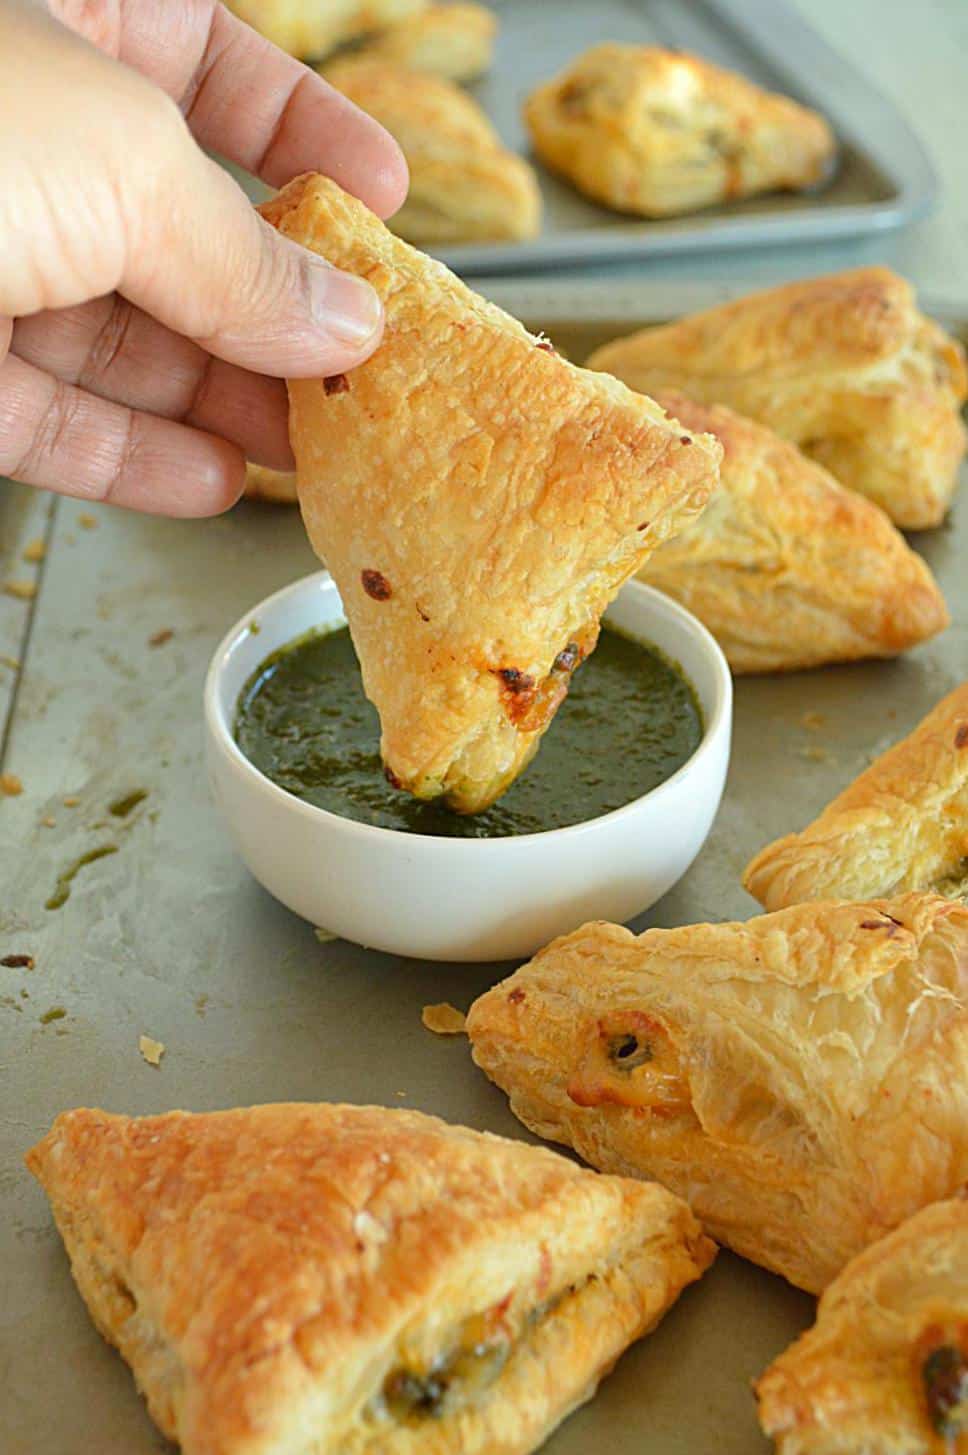 Cheesy Broccoli And Spinach Puffs | Spice up your party with these crispy and flaky Cheesy Broccoli And Spinach Puffs! | www.ruchiskitchen.com